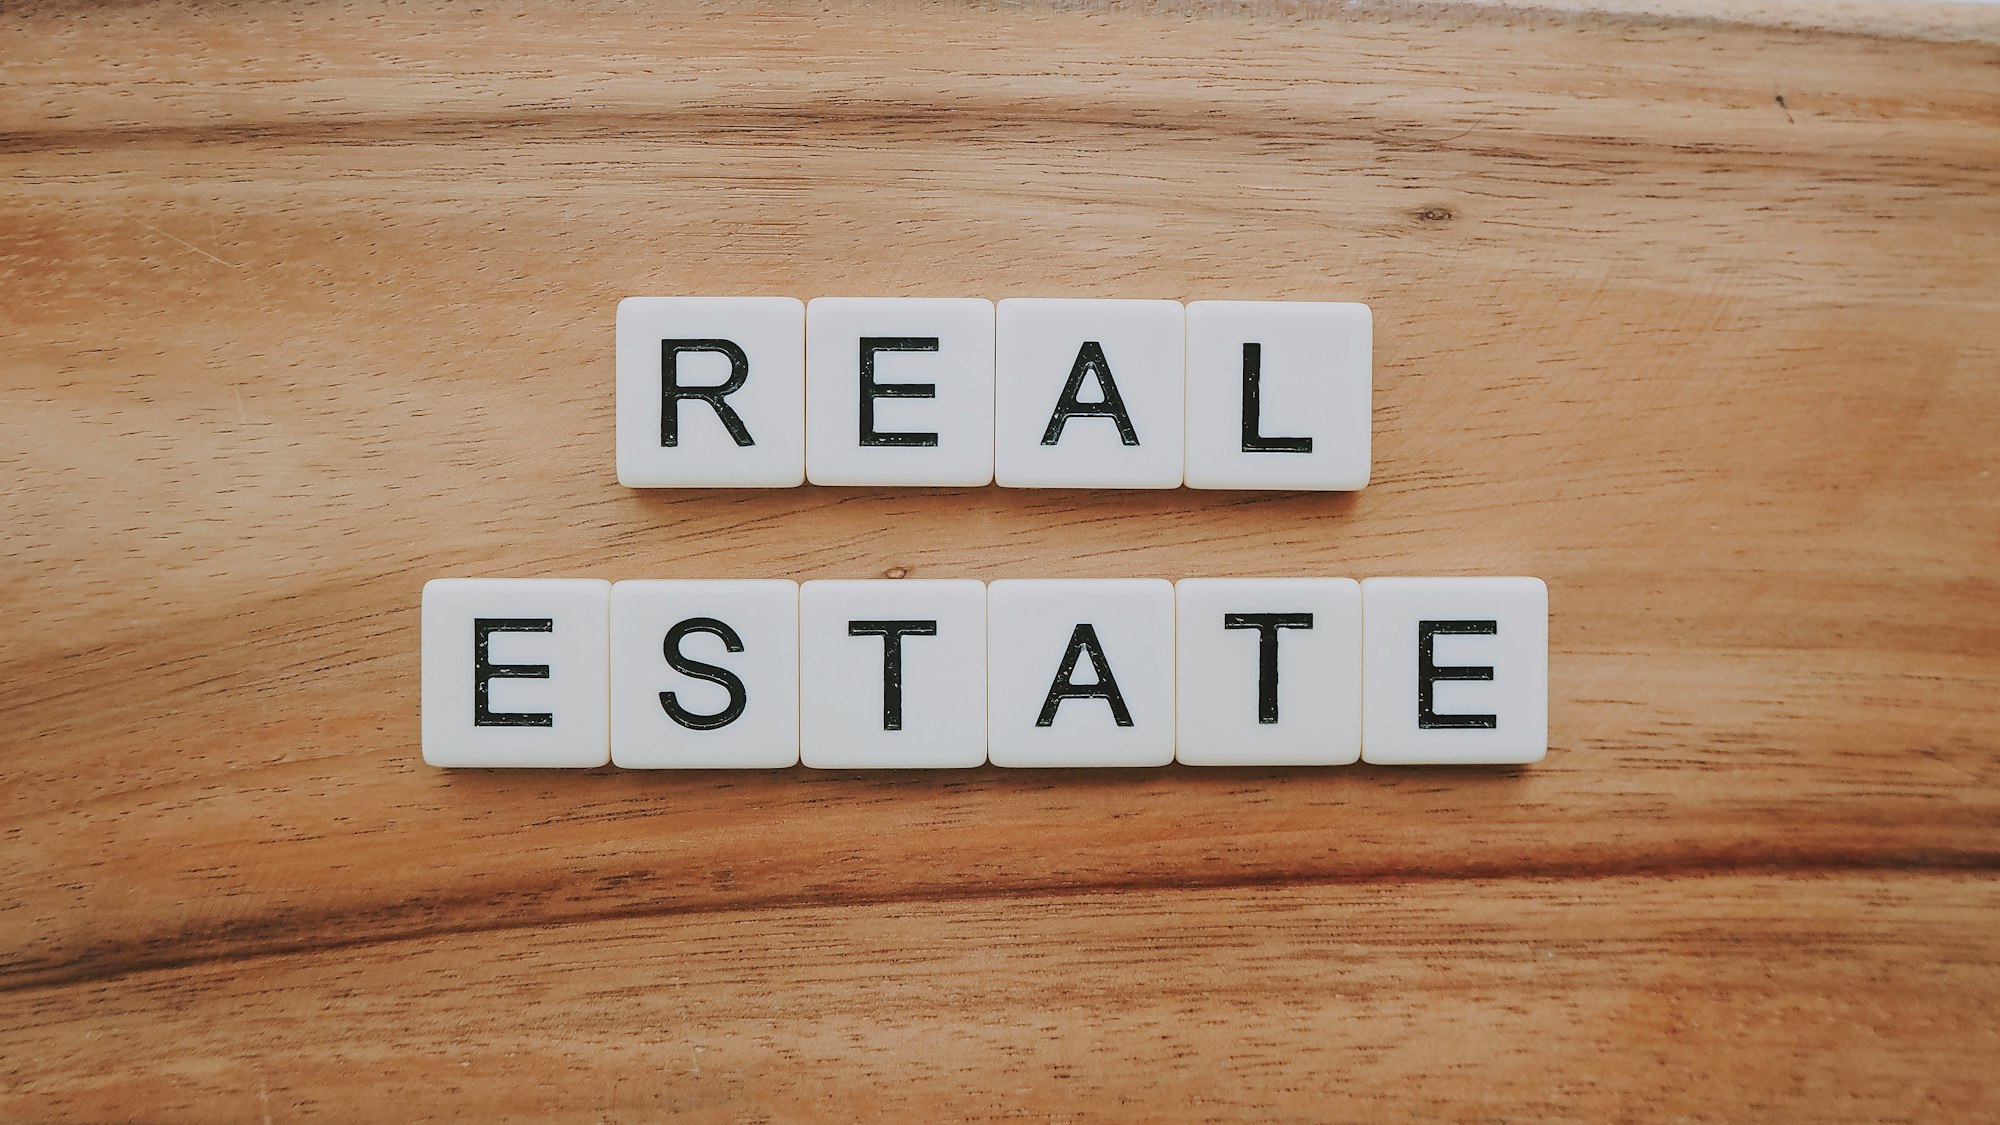 Real estate spelled out in letter blocks.